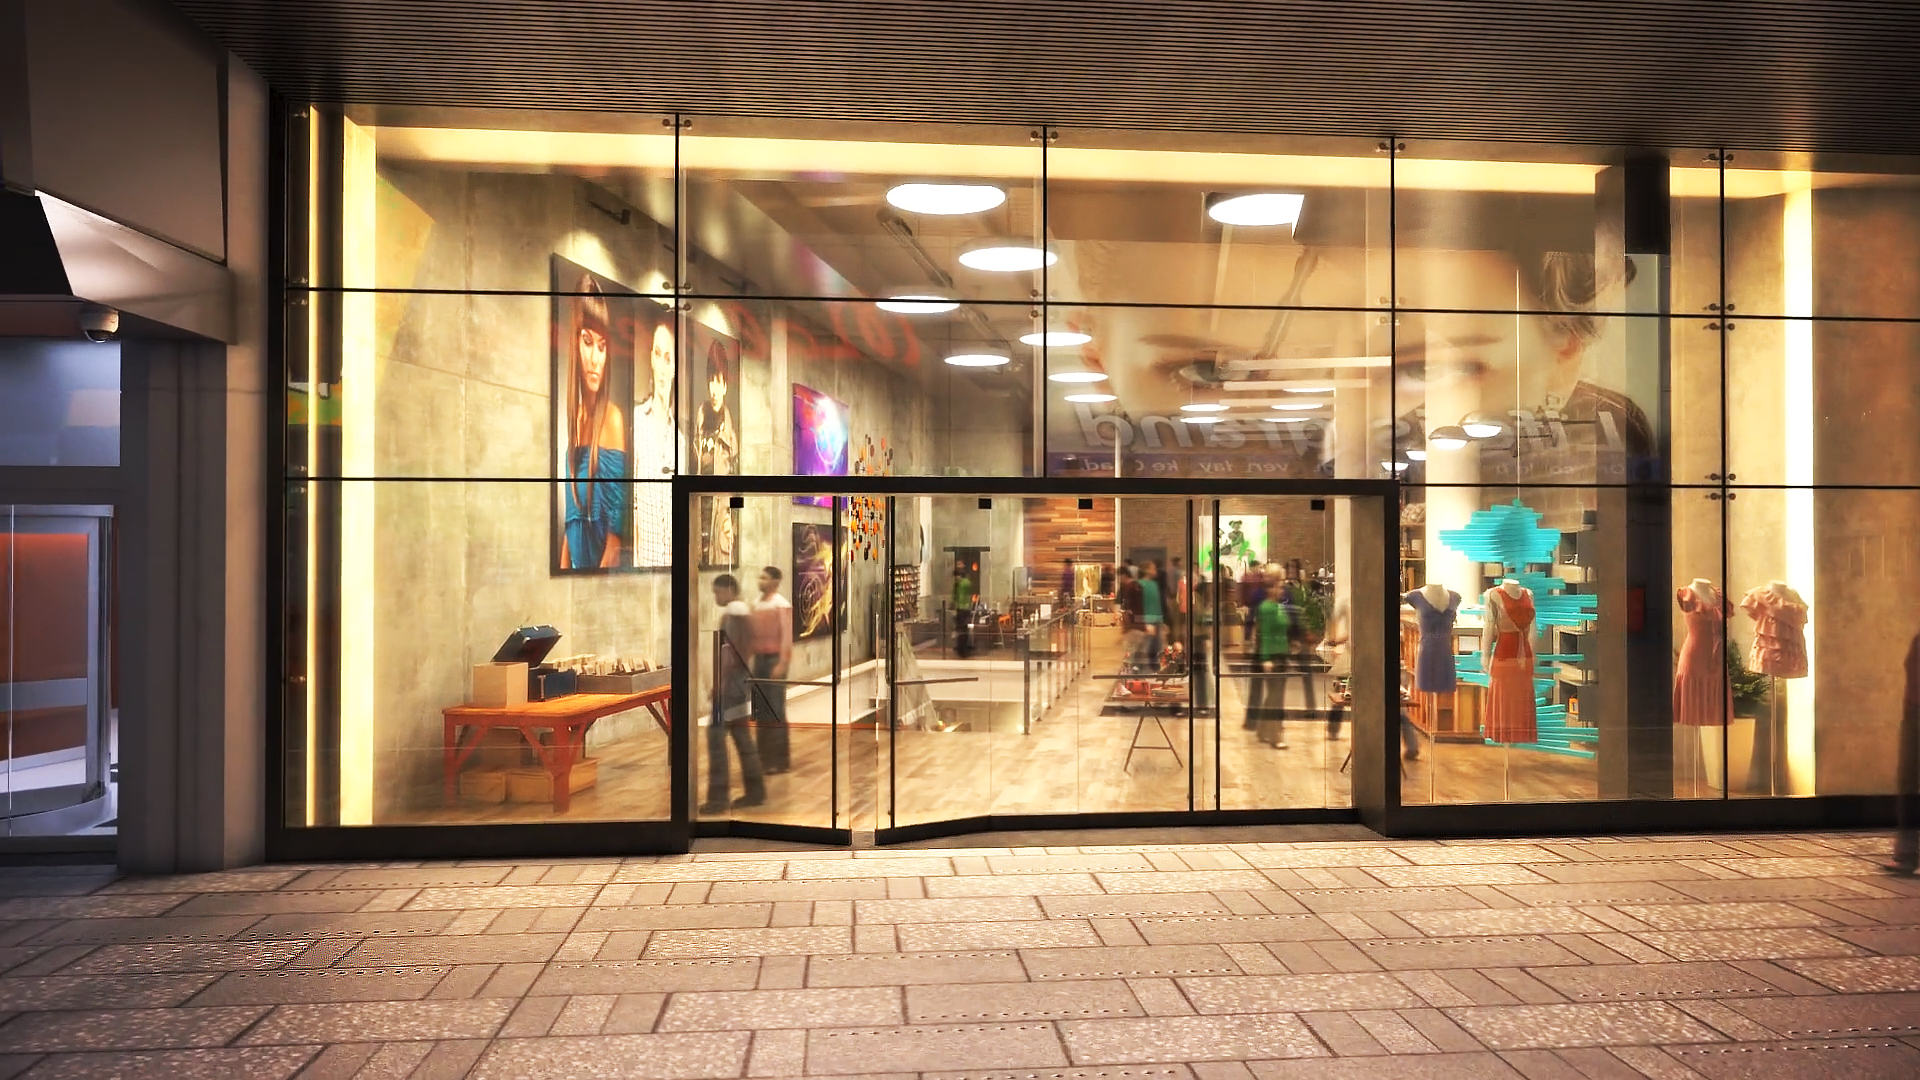 Entrance to the retail store featuring glass windows allowing the viewers to see the interior